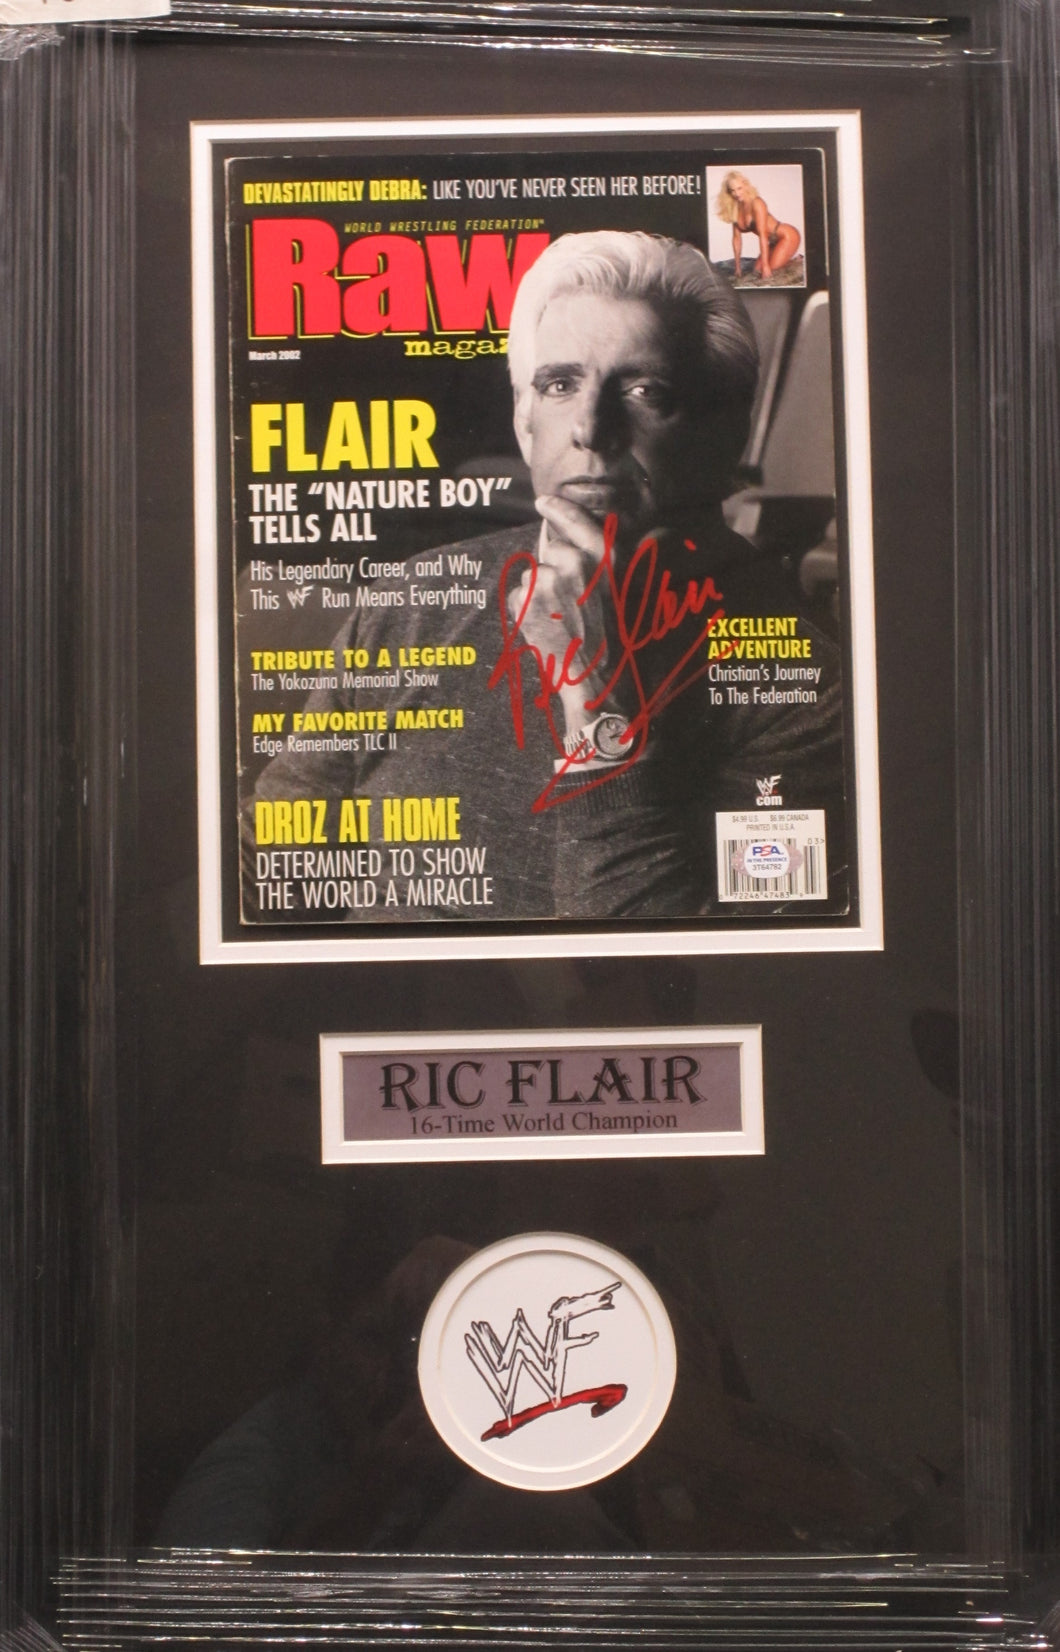 American Professional Wrestler Ric Flair Signed 2002 Raw Magazine Framed & Matted with PSA COA